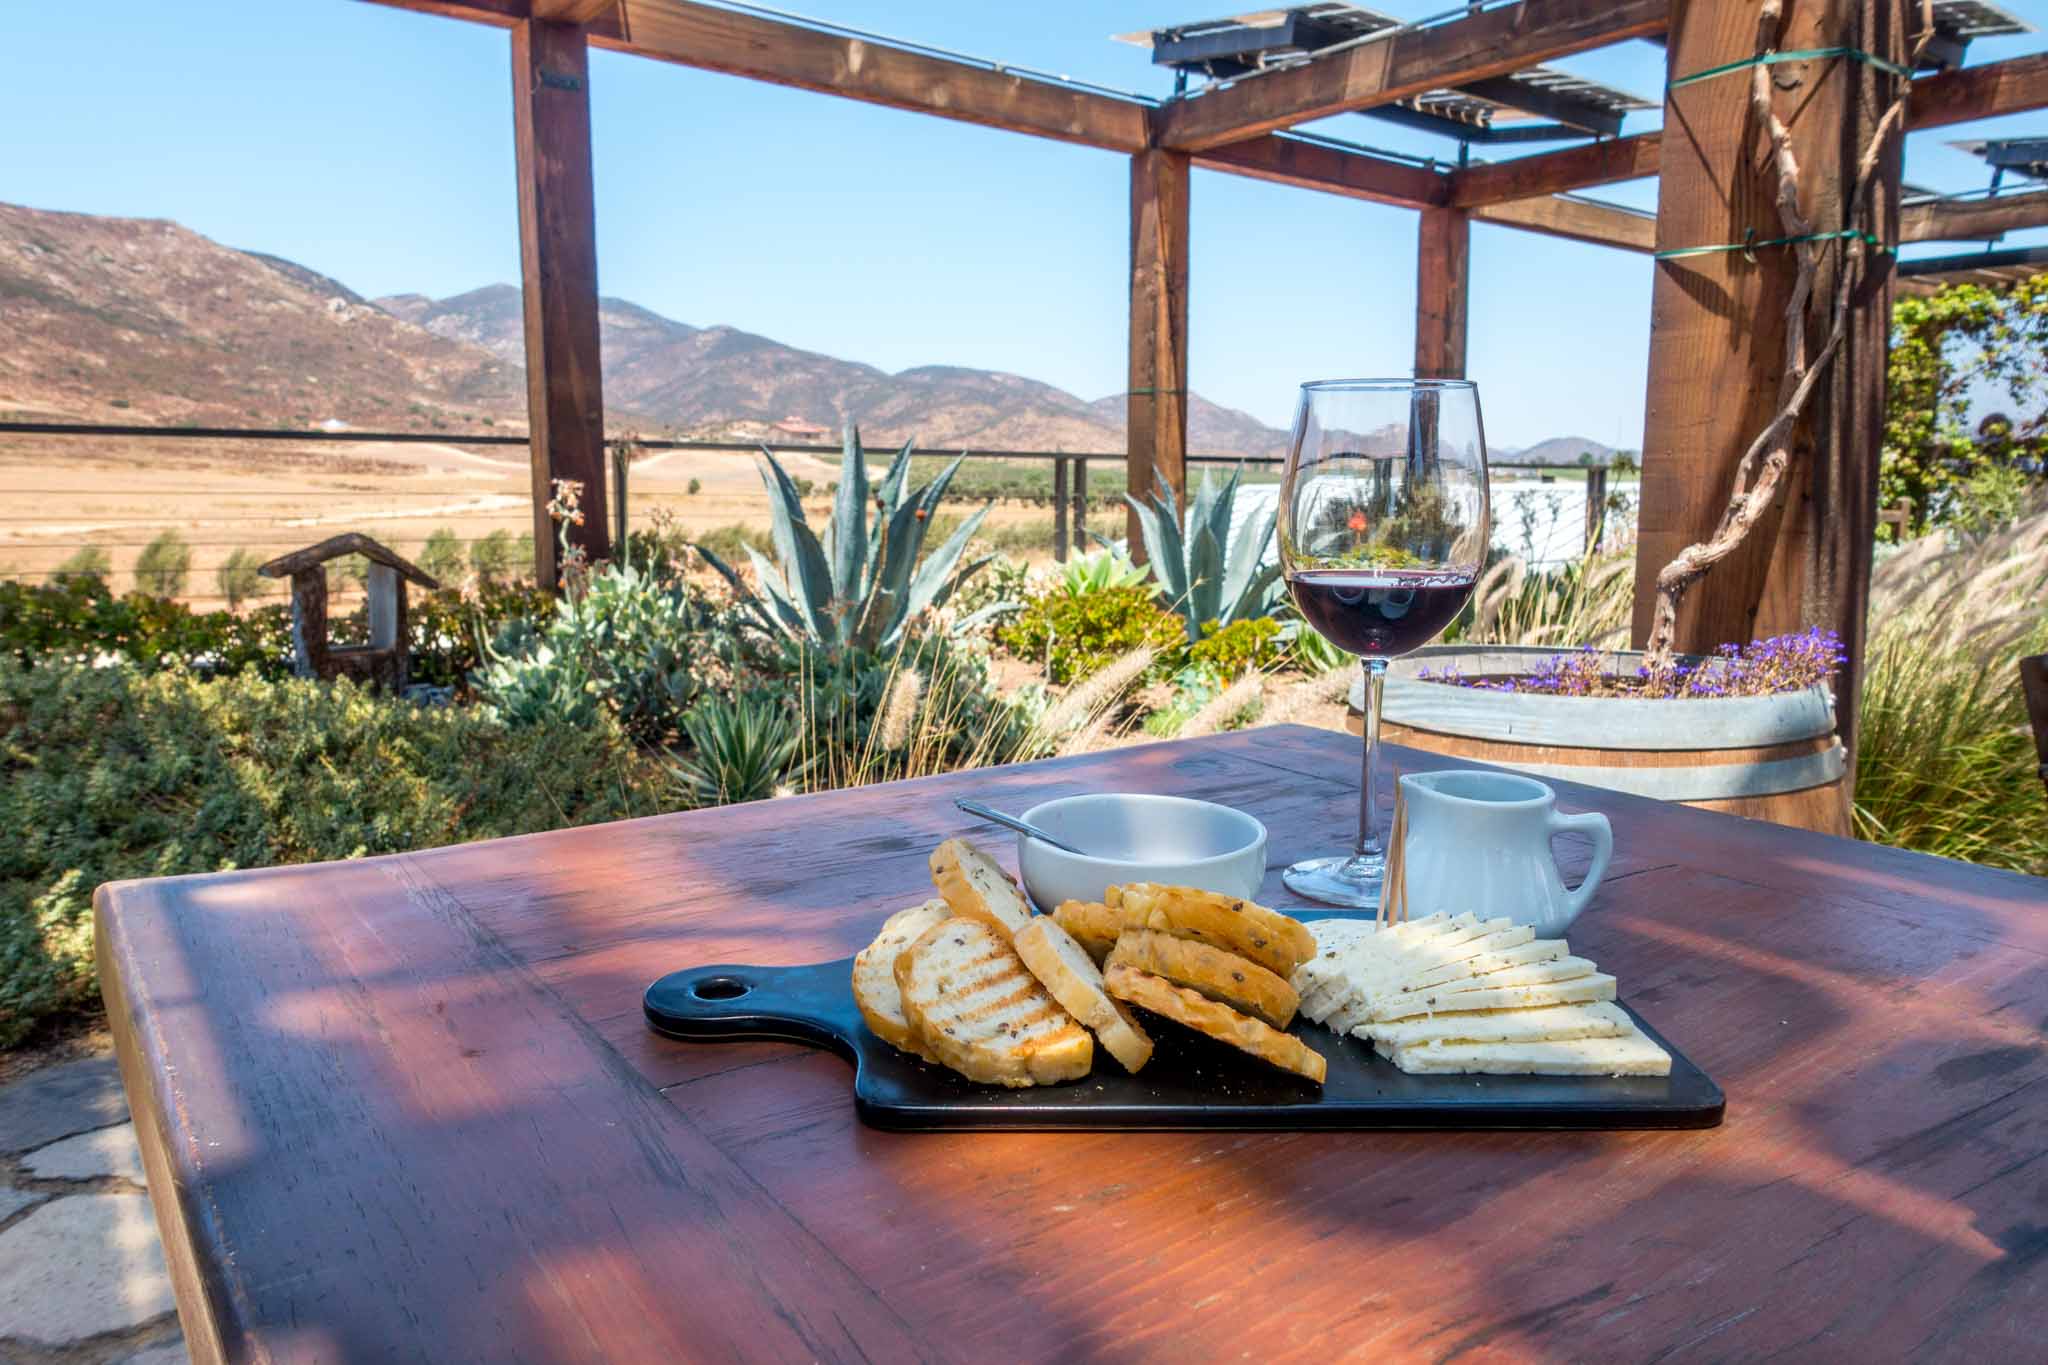 Complete Guide to the Valle de Guadalupe Wineries in Baja, Mexico